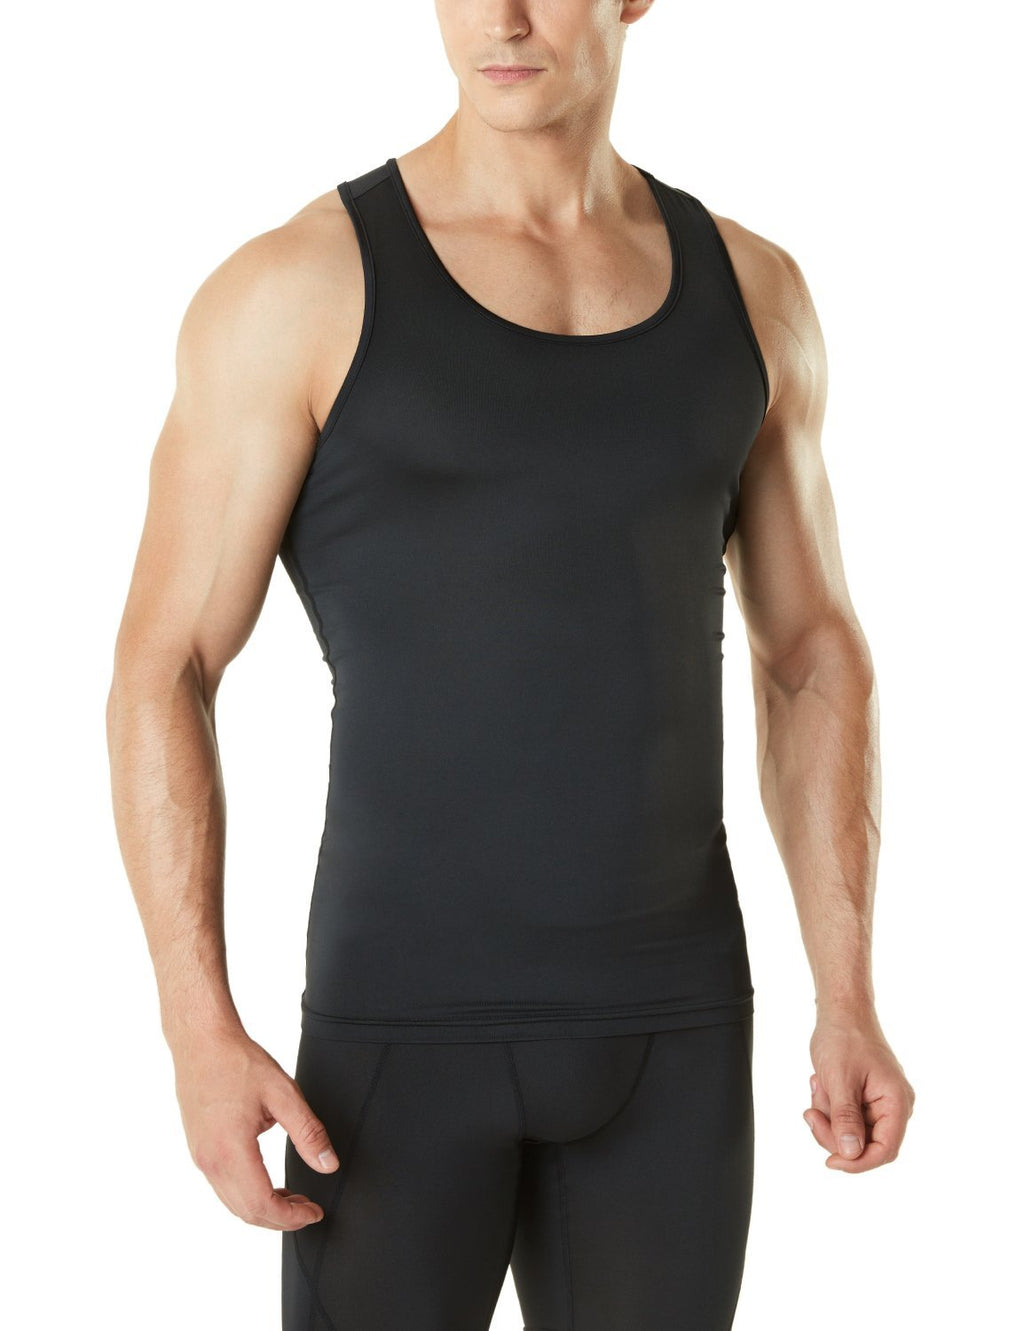 [AUSTRALIA] - TSLA 1 or 3 Pack Men's Athletic Compression Sleeveless Tank Top, Cool Dry Sports Running Basketball Workout Base Layer Active(mun04) - Black X-Large 